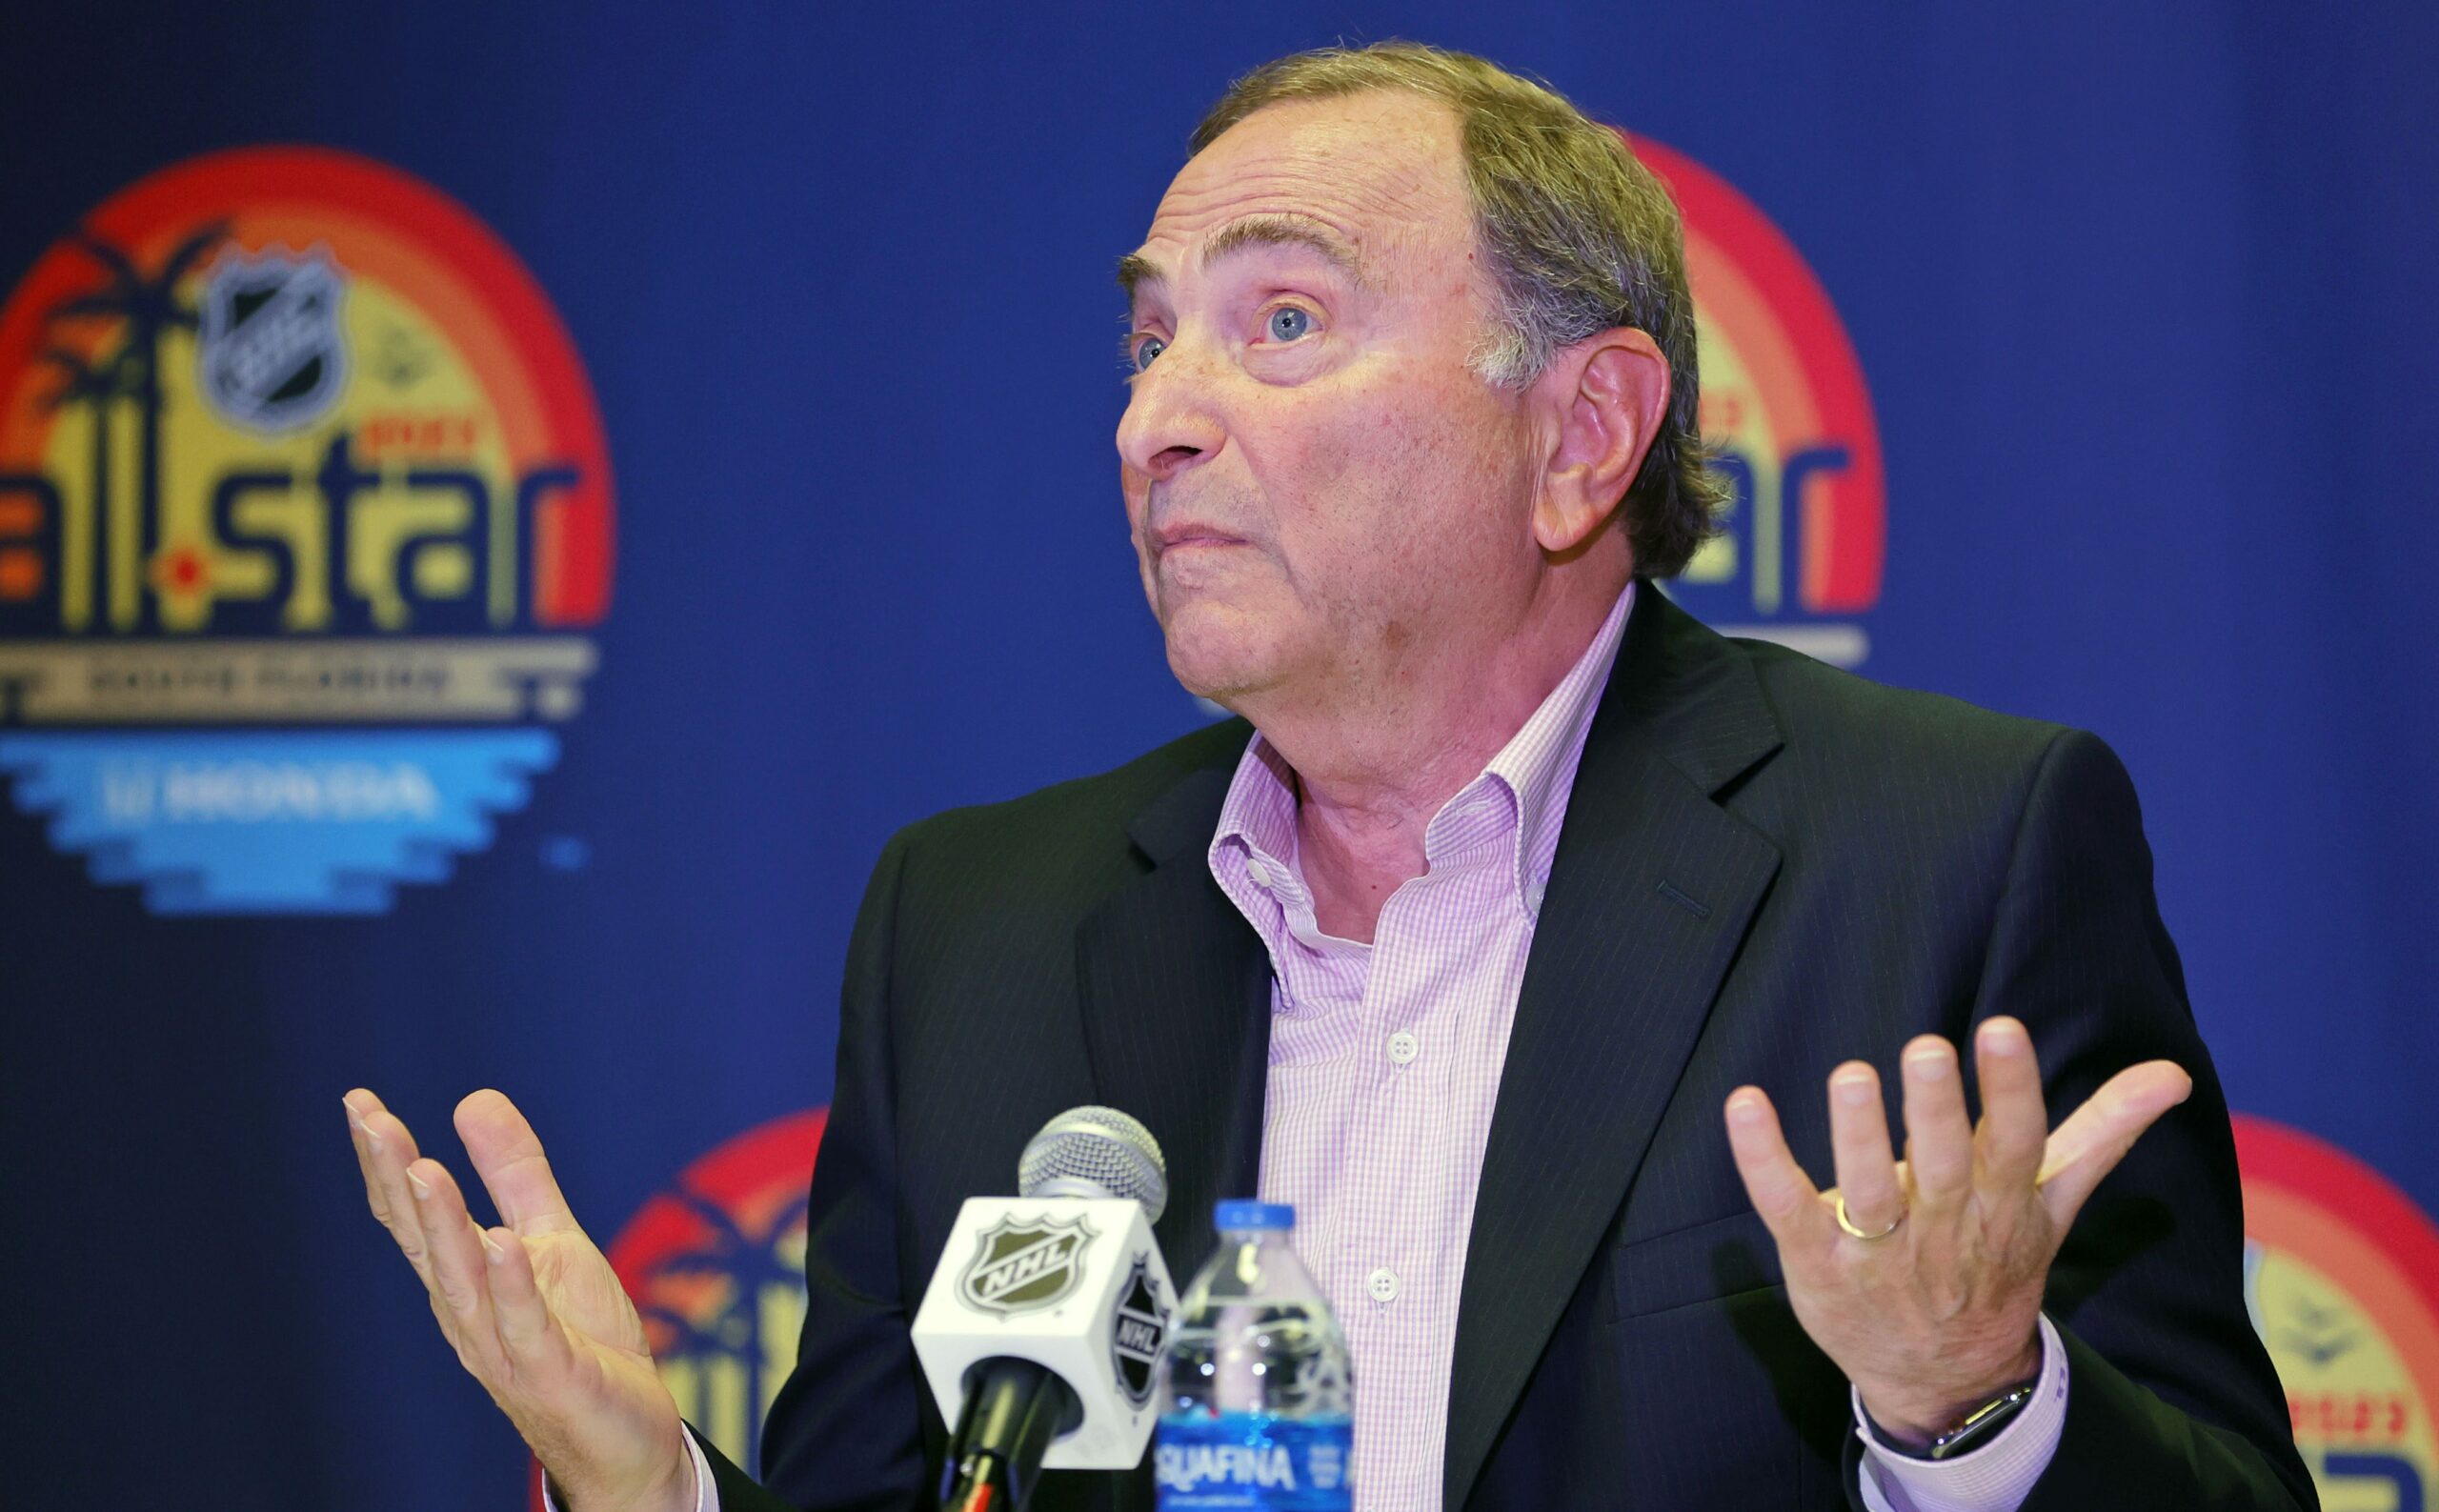 Gary Bettman on playoff format absolutely hated by NHL fans: ‘It’s working well’